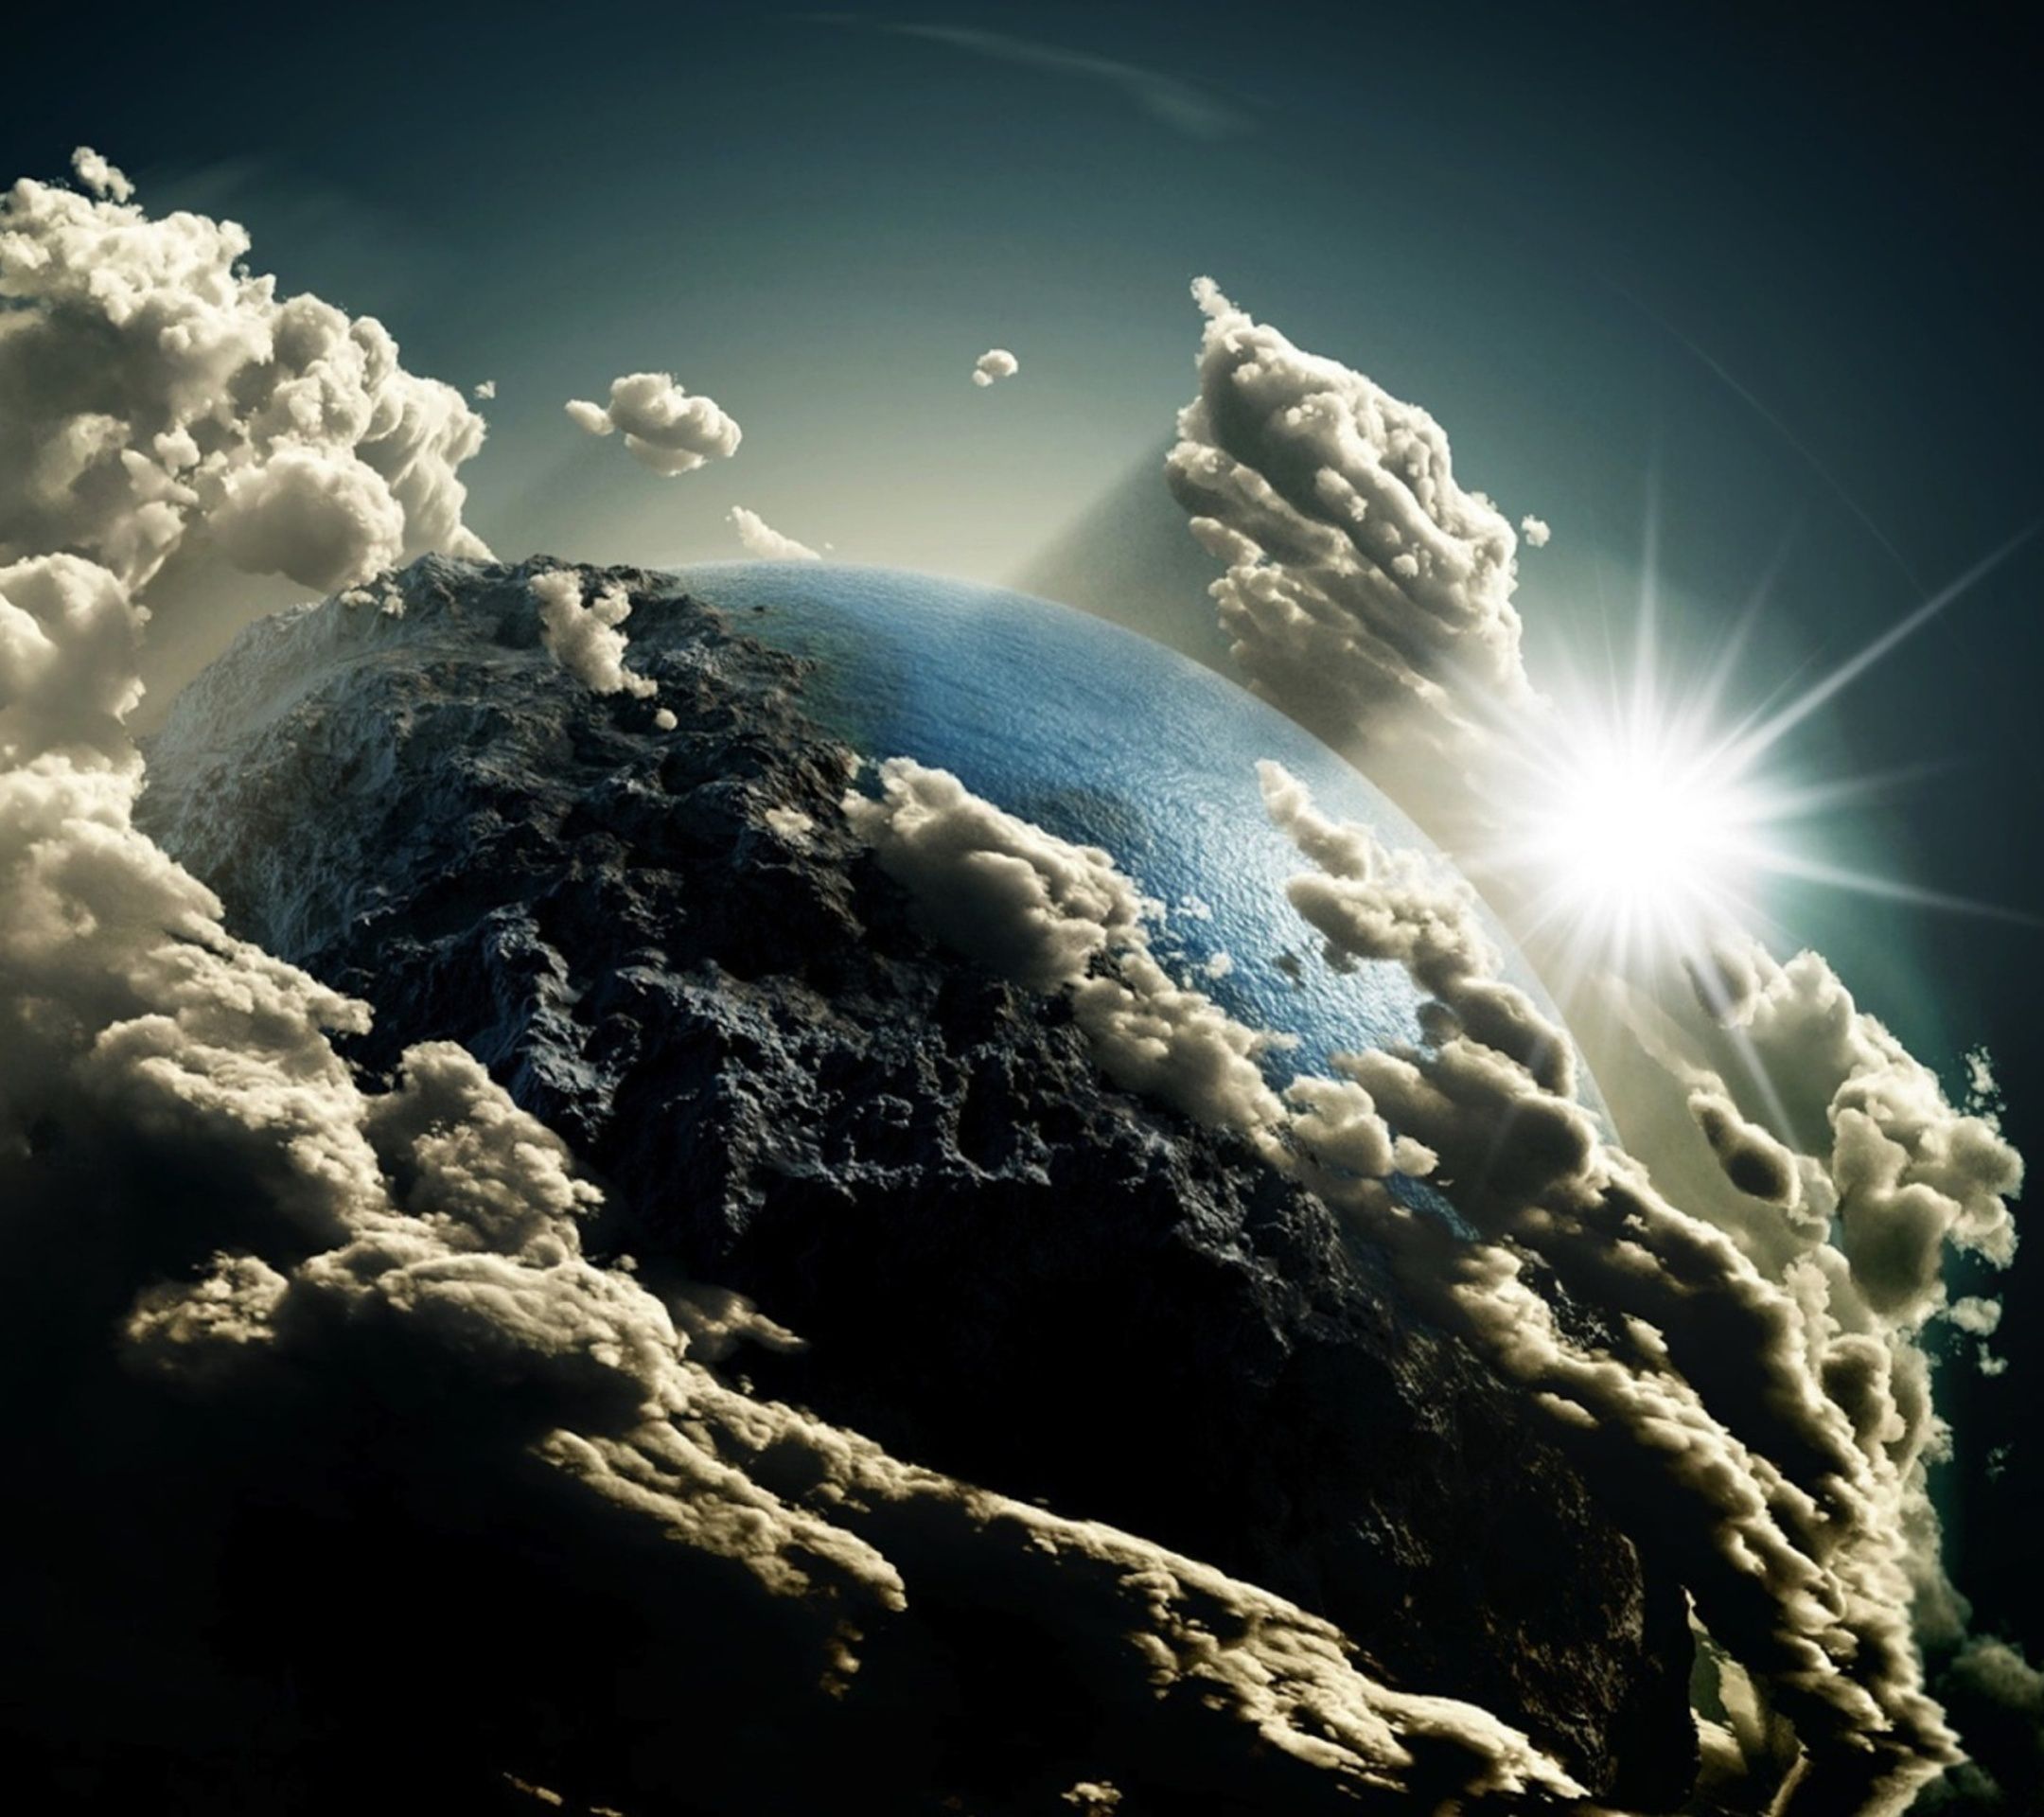 Earths-View-in-Clouds-Top-10-HD-Samsung-Galaxy-S5-Wallpapers-download.jpg